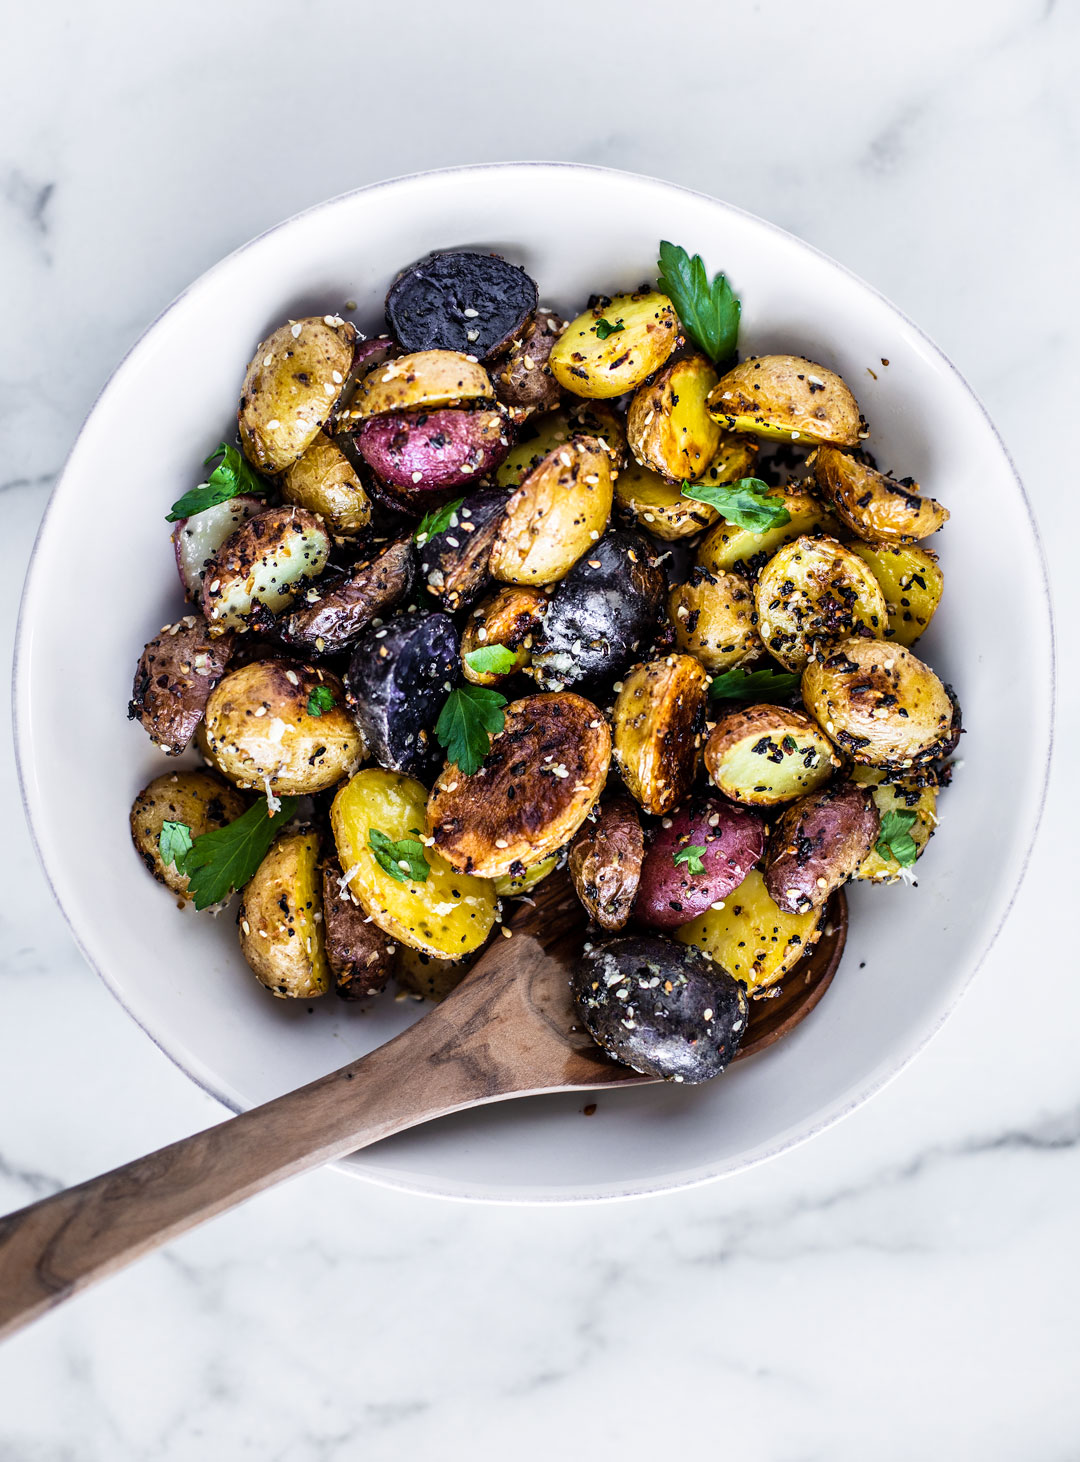 Roasted potatoes with Everything Bagel Seasoning in a white serving bowl on white marble.